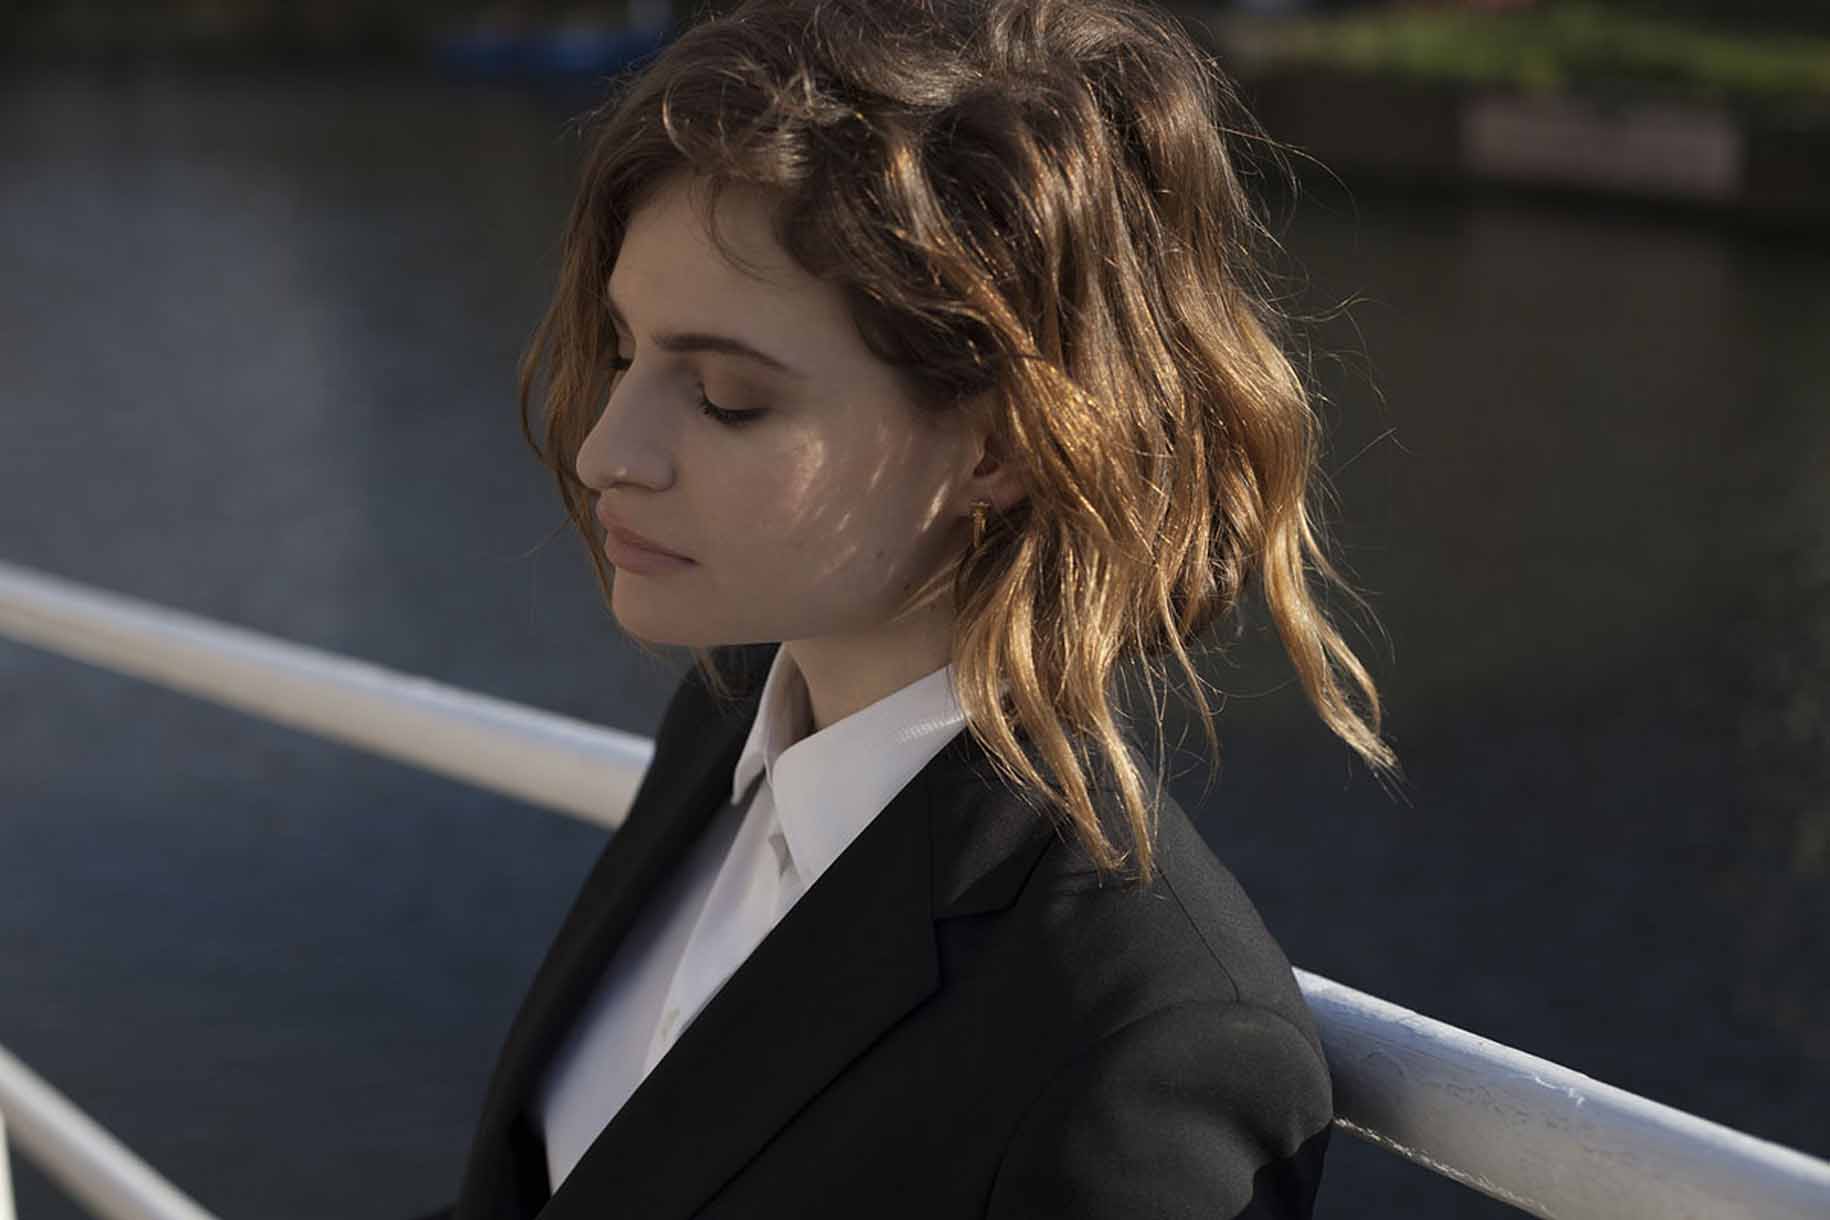 Chaleur Humaine, Christine and the Queens